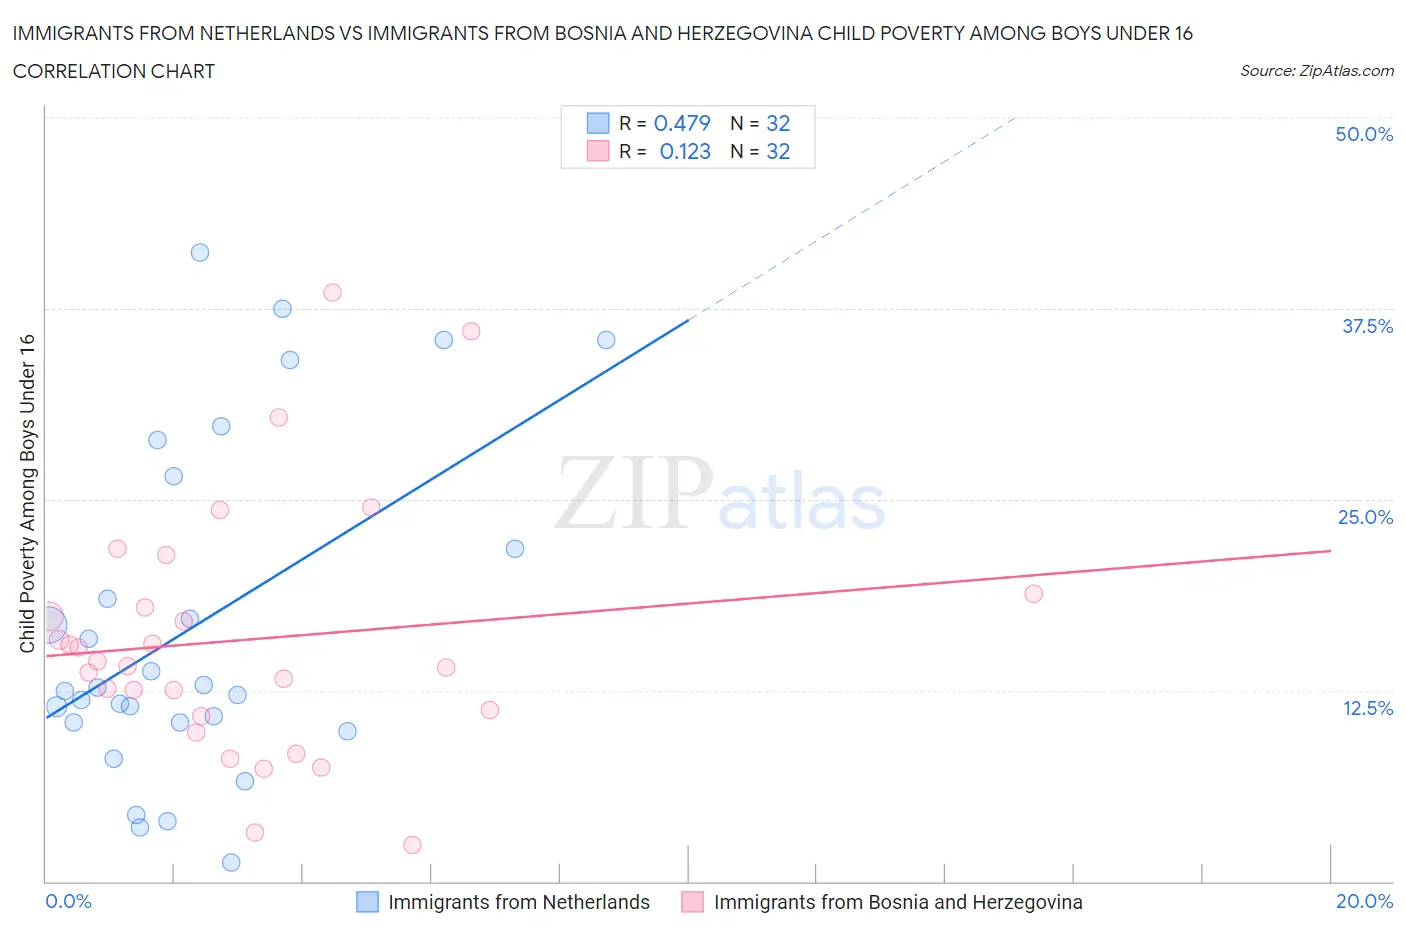 Immigrants from Netherlands vs Immigrants from Bosnia and Herzegovina Child Poverty Among Boys Under 16